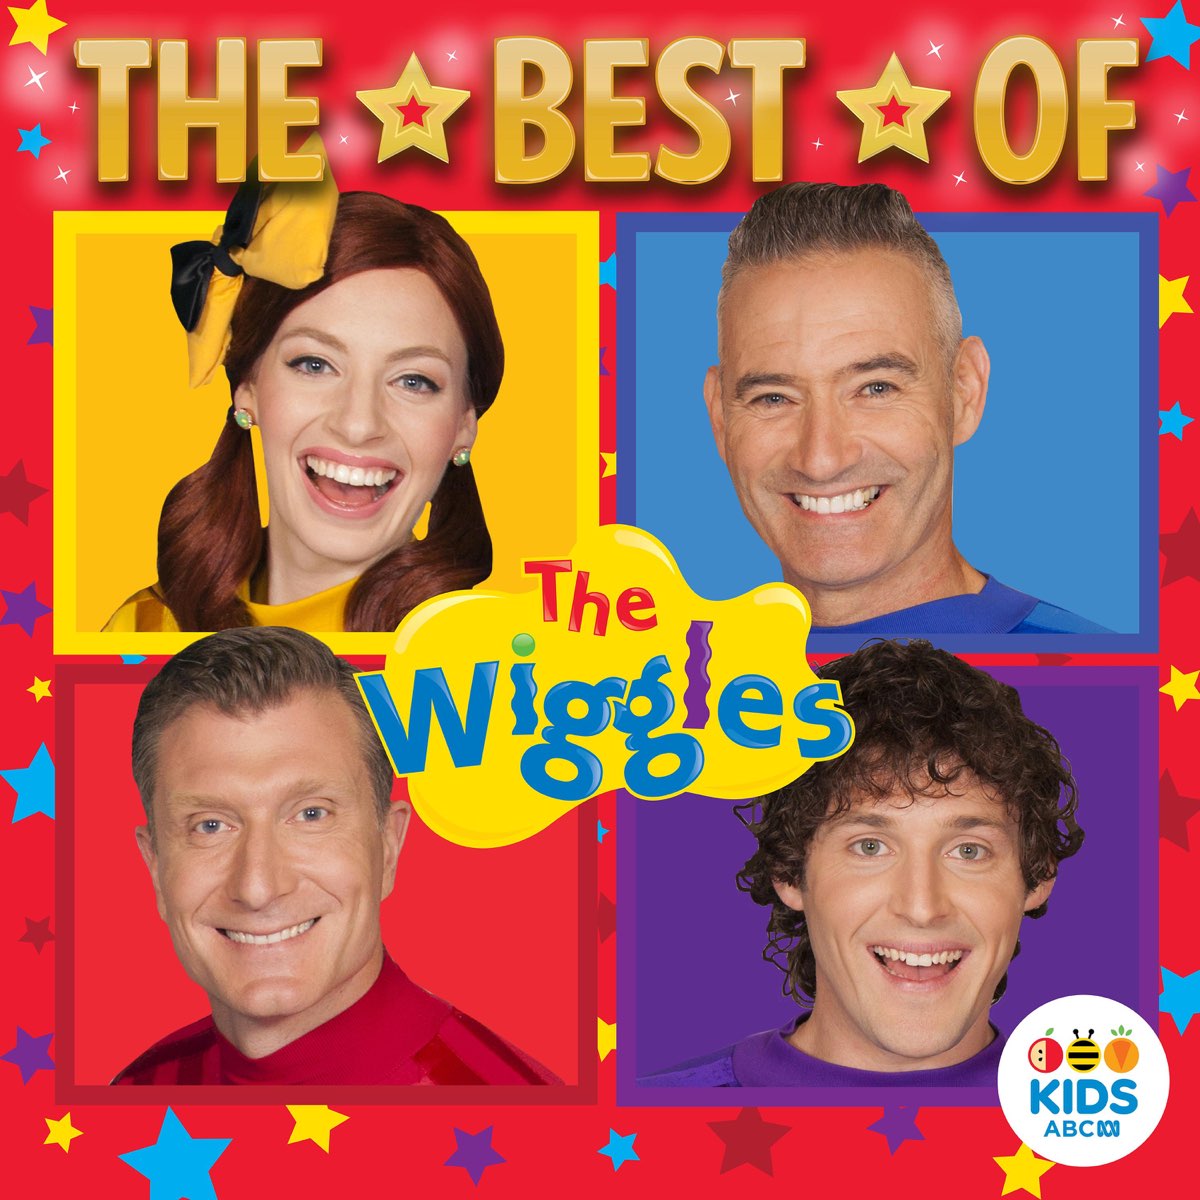 ‎The Best of The Wiggles by The Wiggles on Apple Music